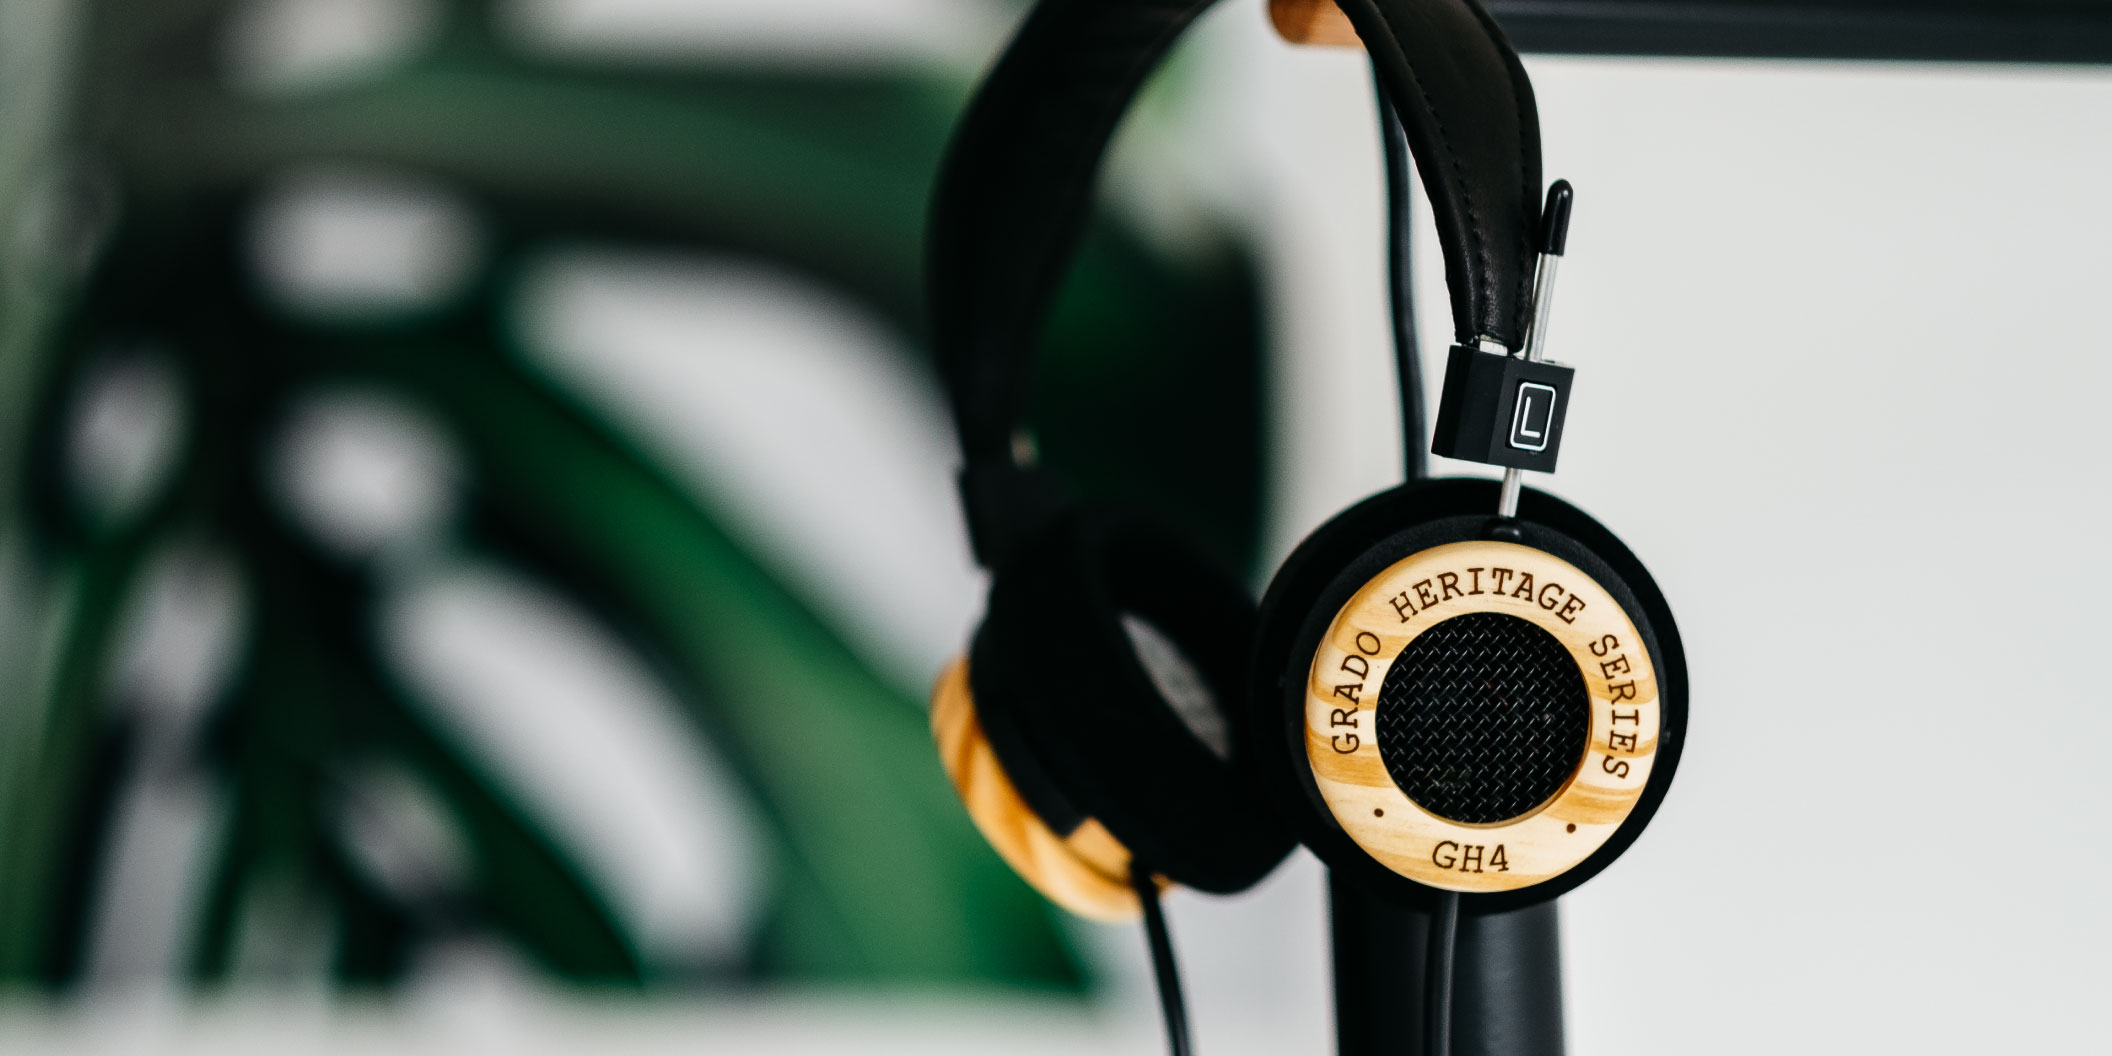 Photo of GH4 headphones with a plant in the background